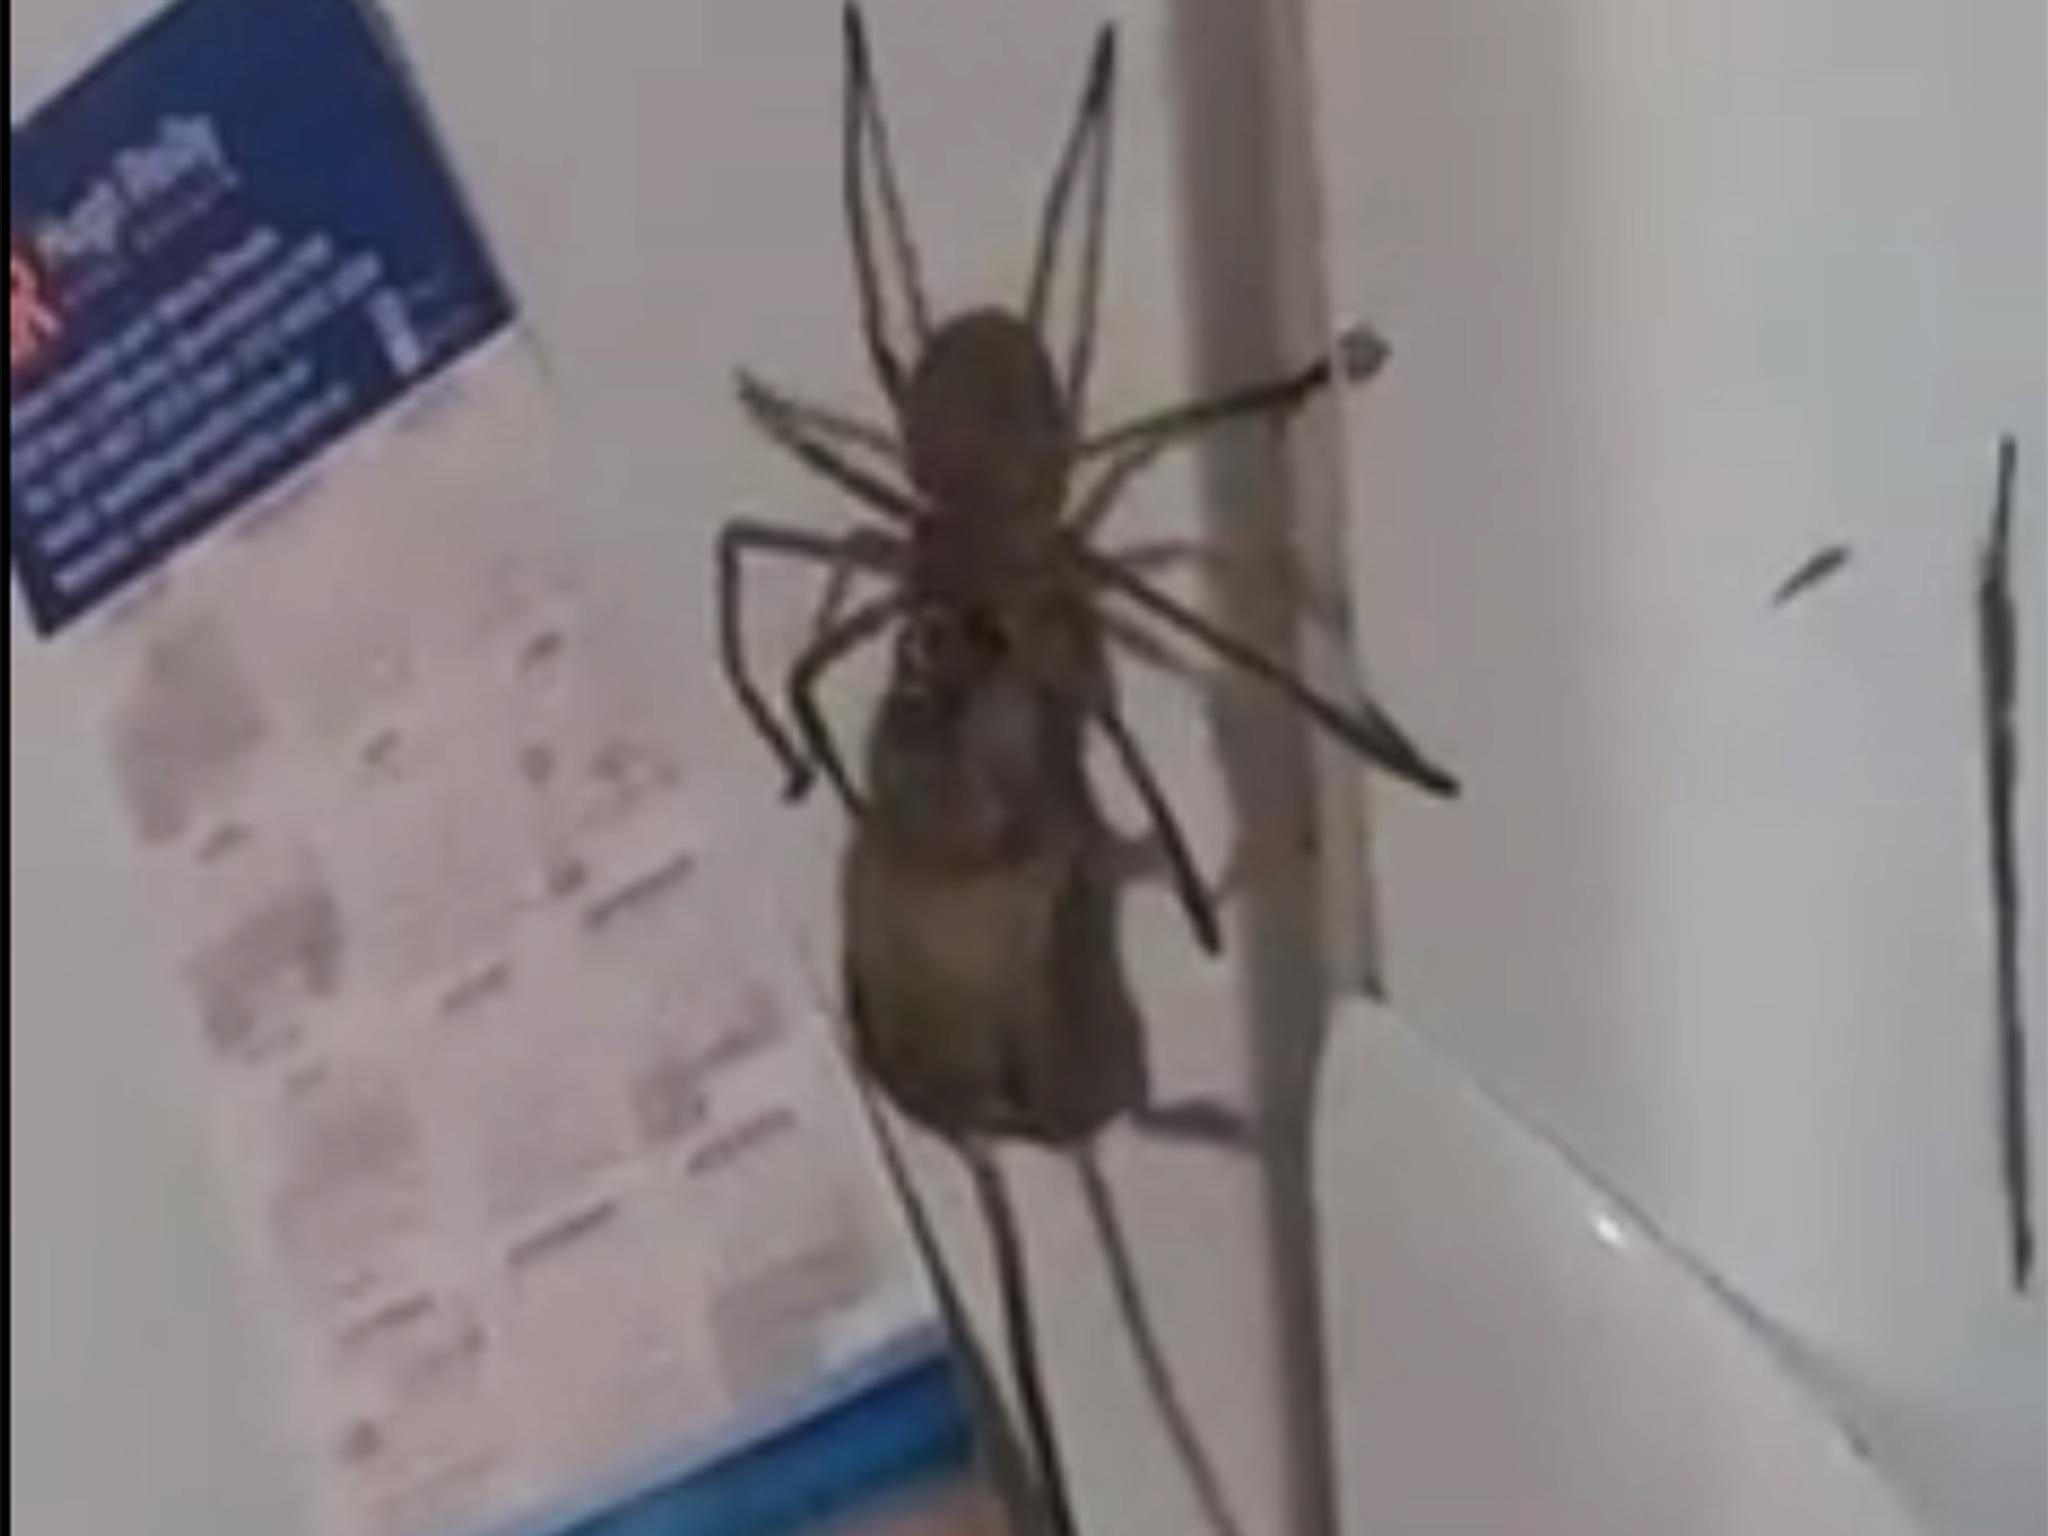 Huge spider eats large mouse in nightmarish video footage | The ...